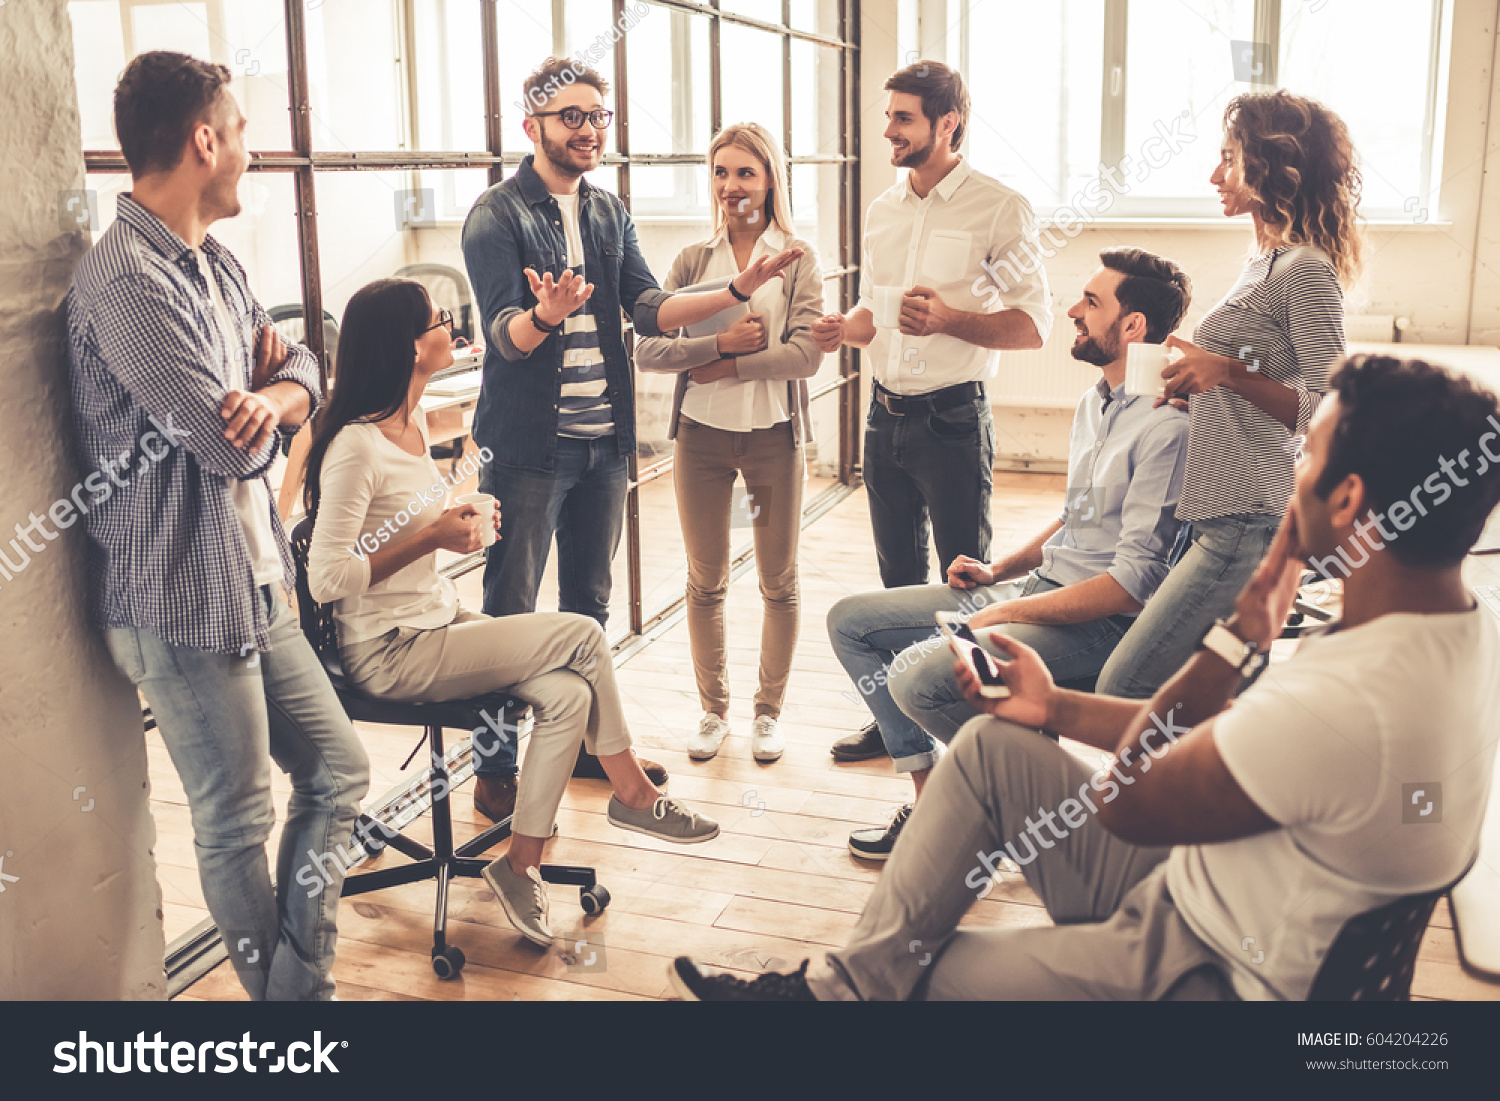 Successful young business people are talking and smiling during the coffee break in office #604204226